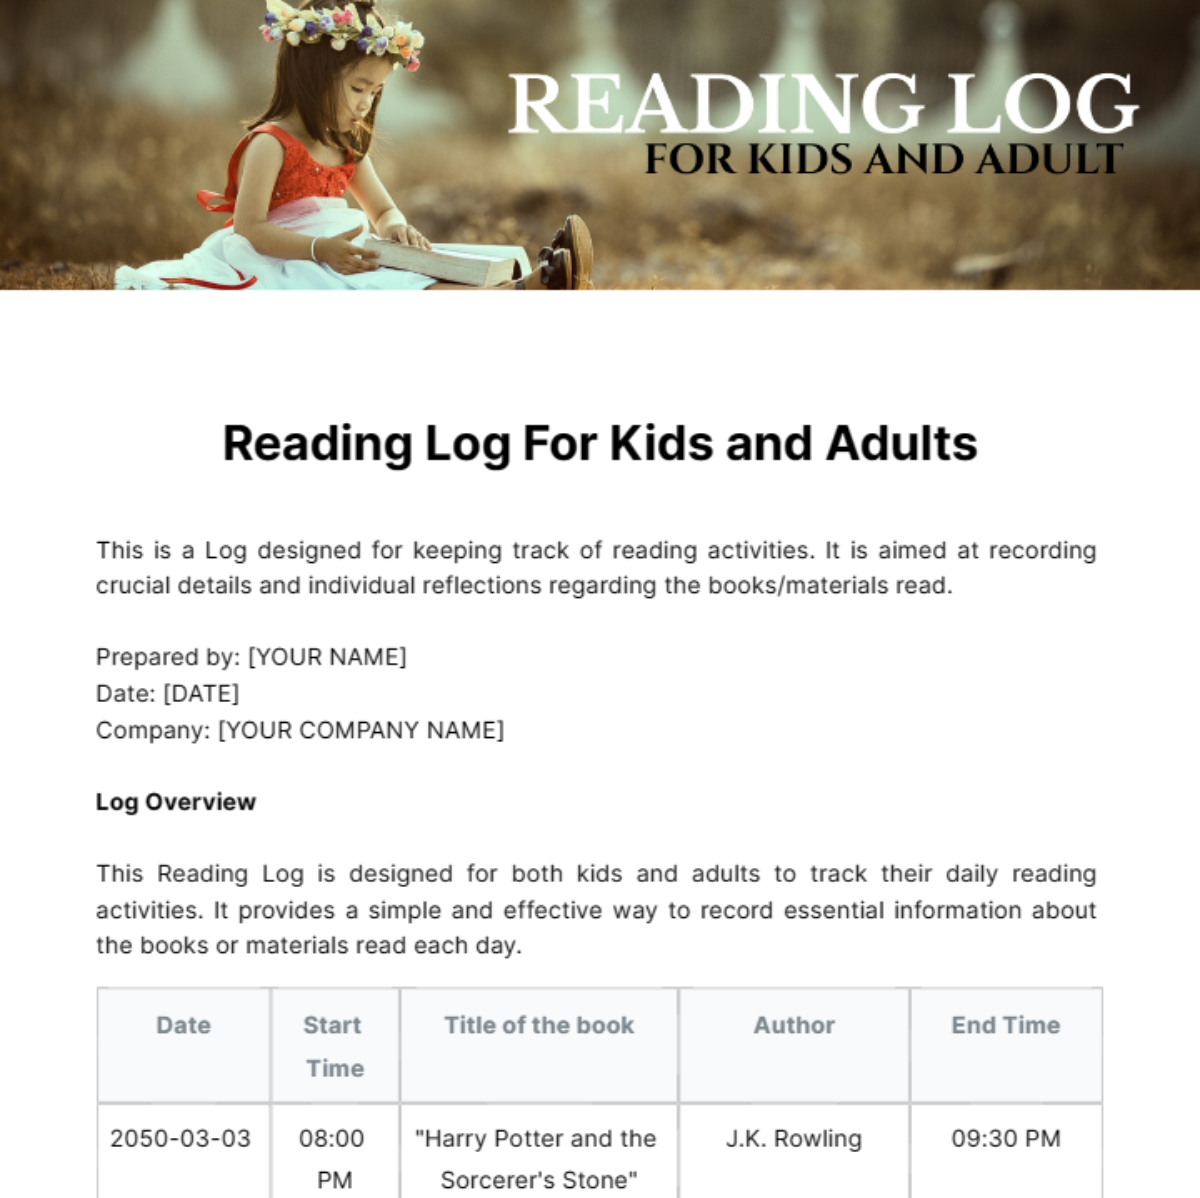 Free Reading Log For Kids and Adults Template